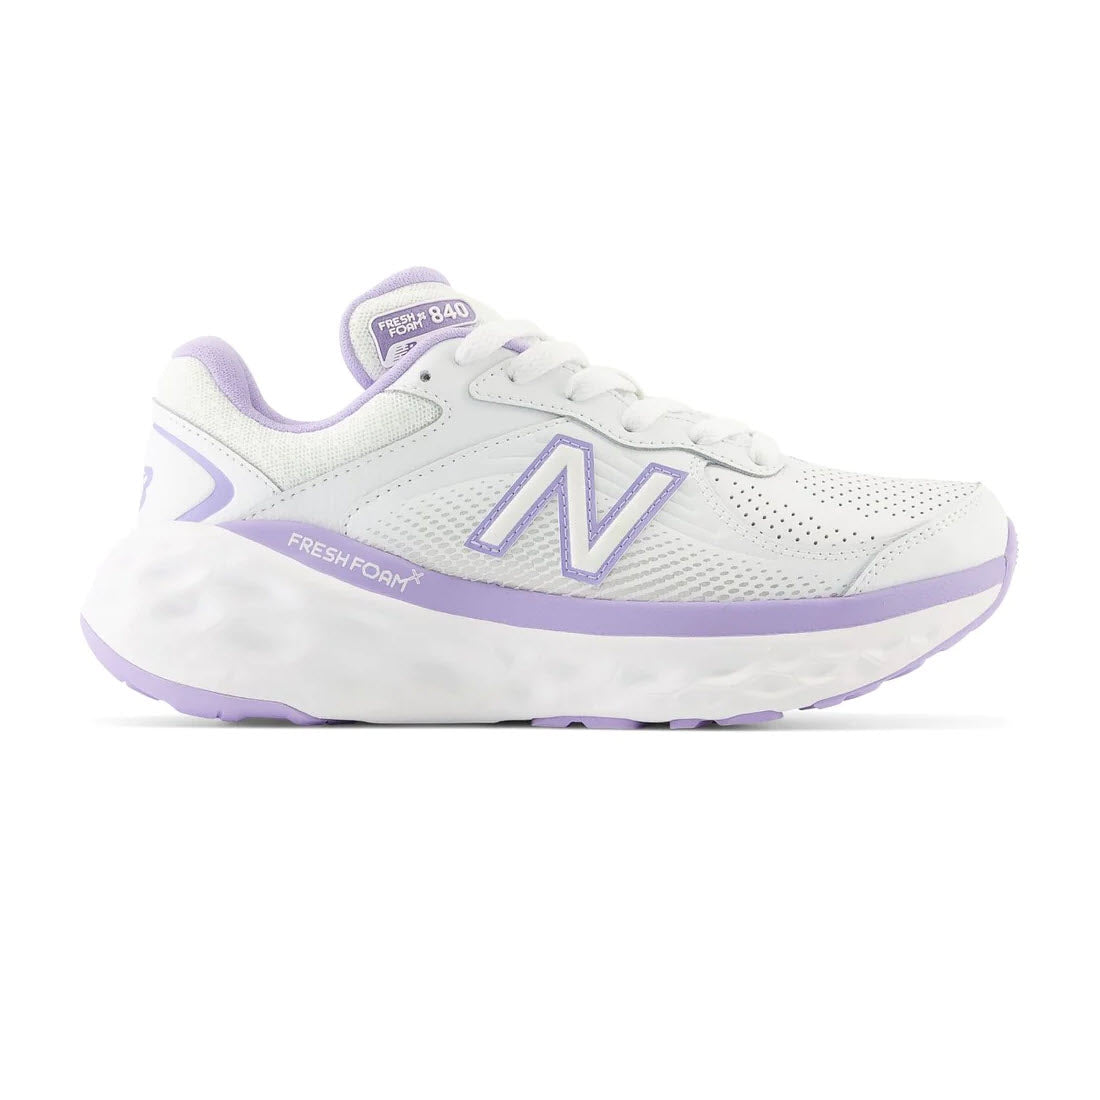 White and purple New Balance Fresh Foam X 840F running shoe with a Fresh Foam X midsole, displayed in a side view on a plain background.